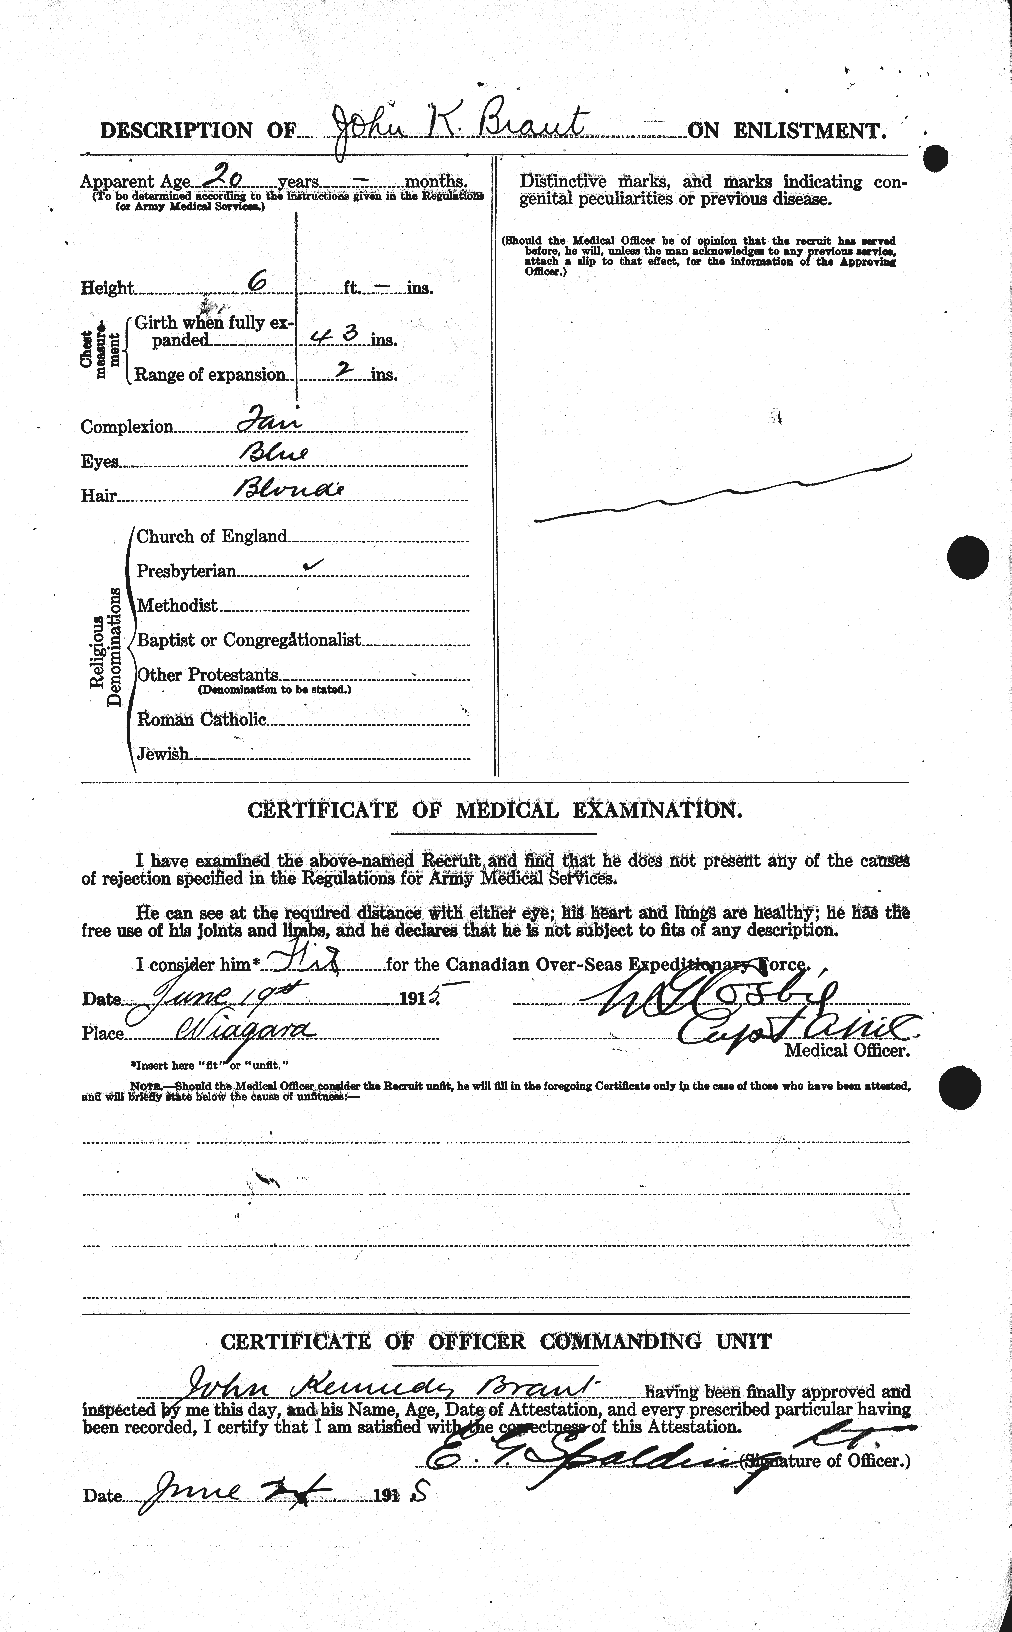 Personnel Records of the First World War - CEF 257859b